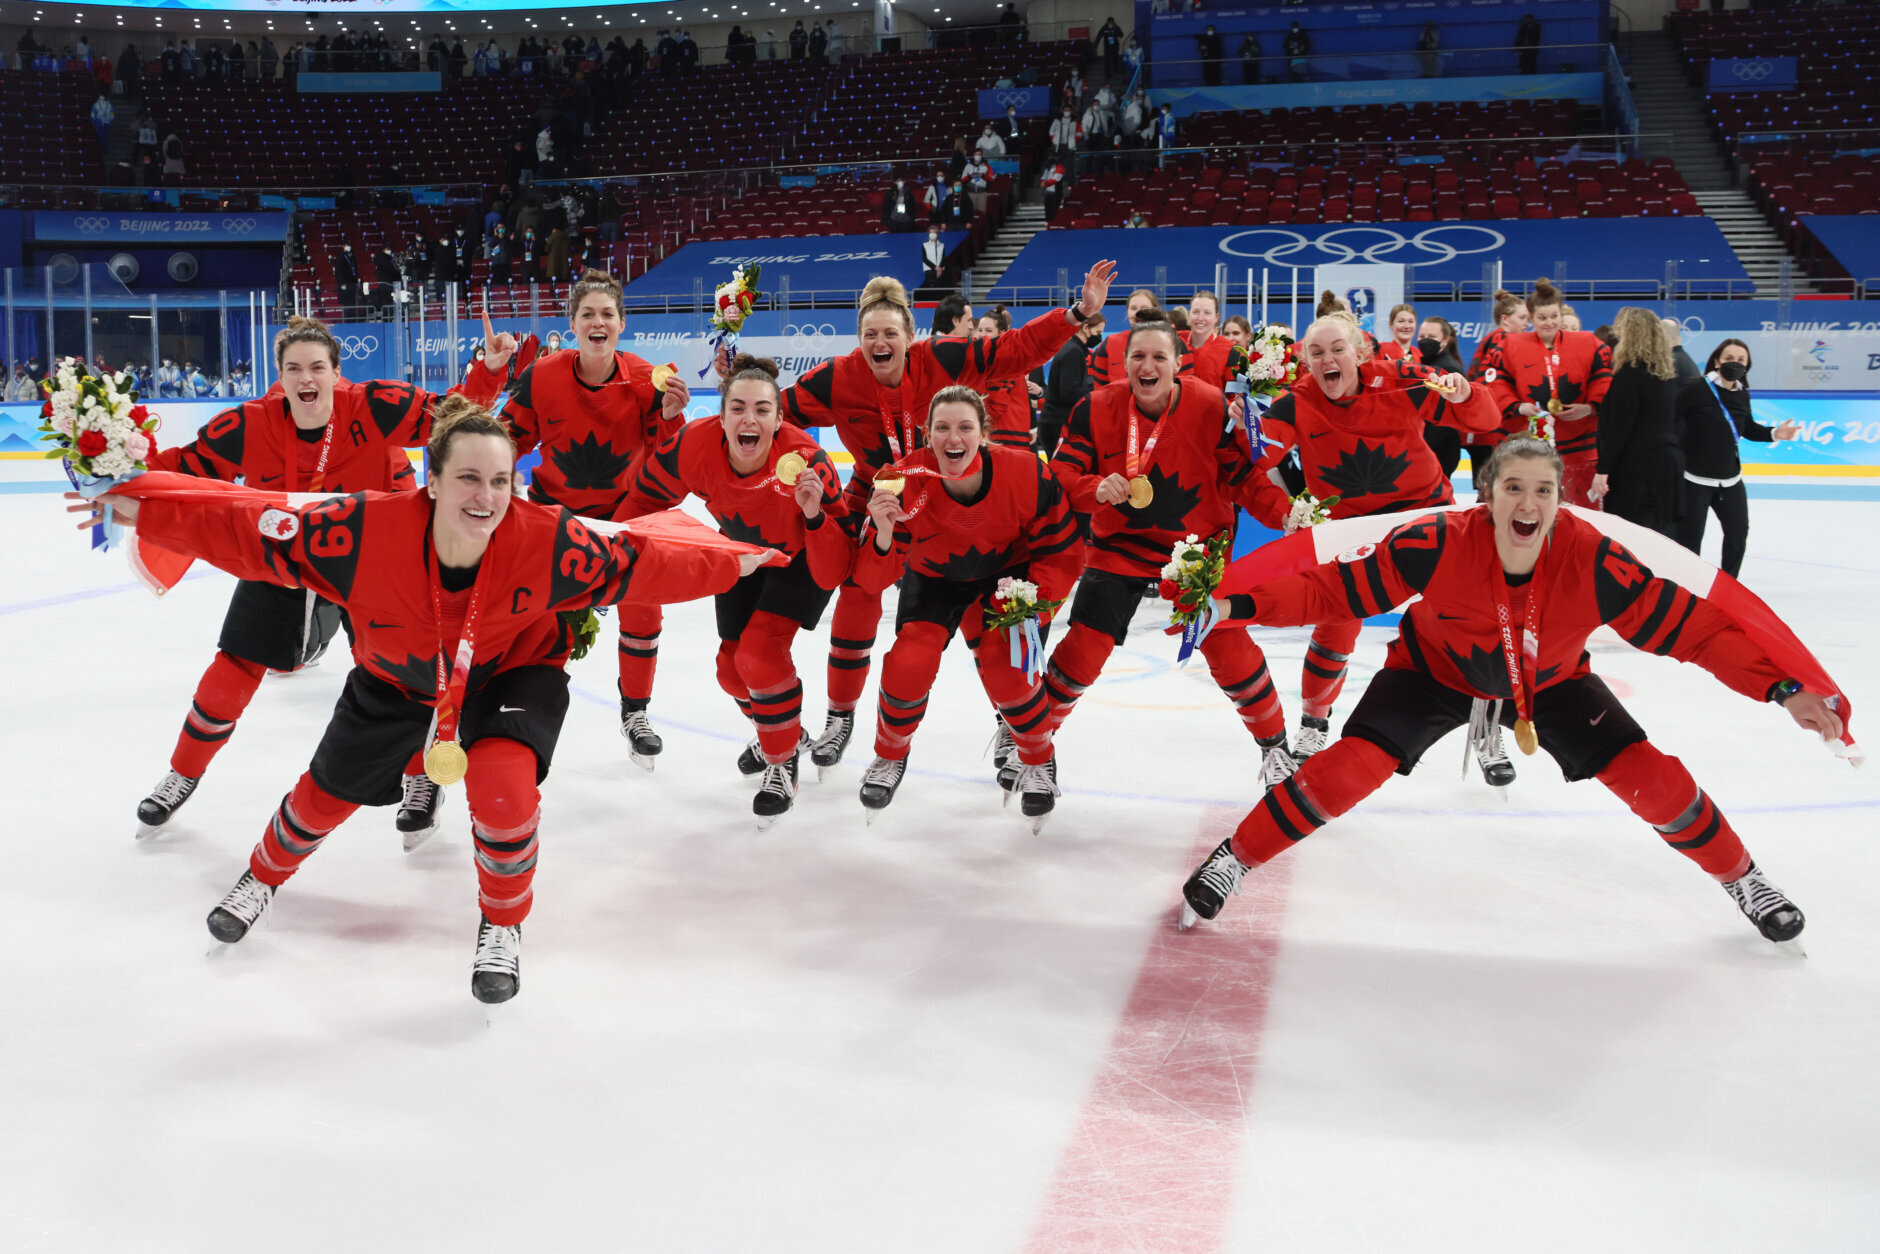 BEIJING, CHINA - FEBRUARY 17: Team Canada celebrates their gold medals after winning the Women's Ice Hockey Gold Medal match between Team Canada and Team United States on Day 13 of the Beijing 2022 Winter Olympic Games at Wukesong Sports Centre on February 17, 2022 in Beijing, China. (Photo by Bruce Bennett/Getty Images)